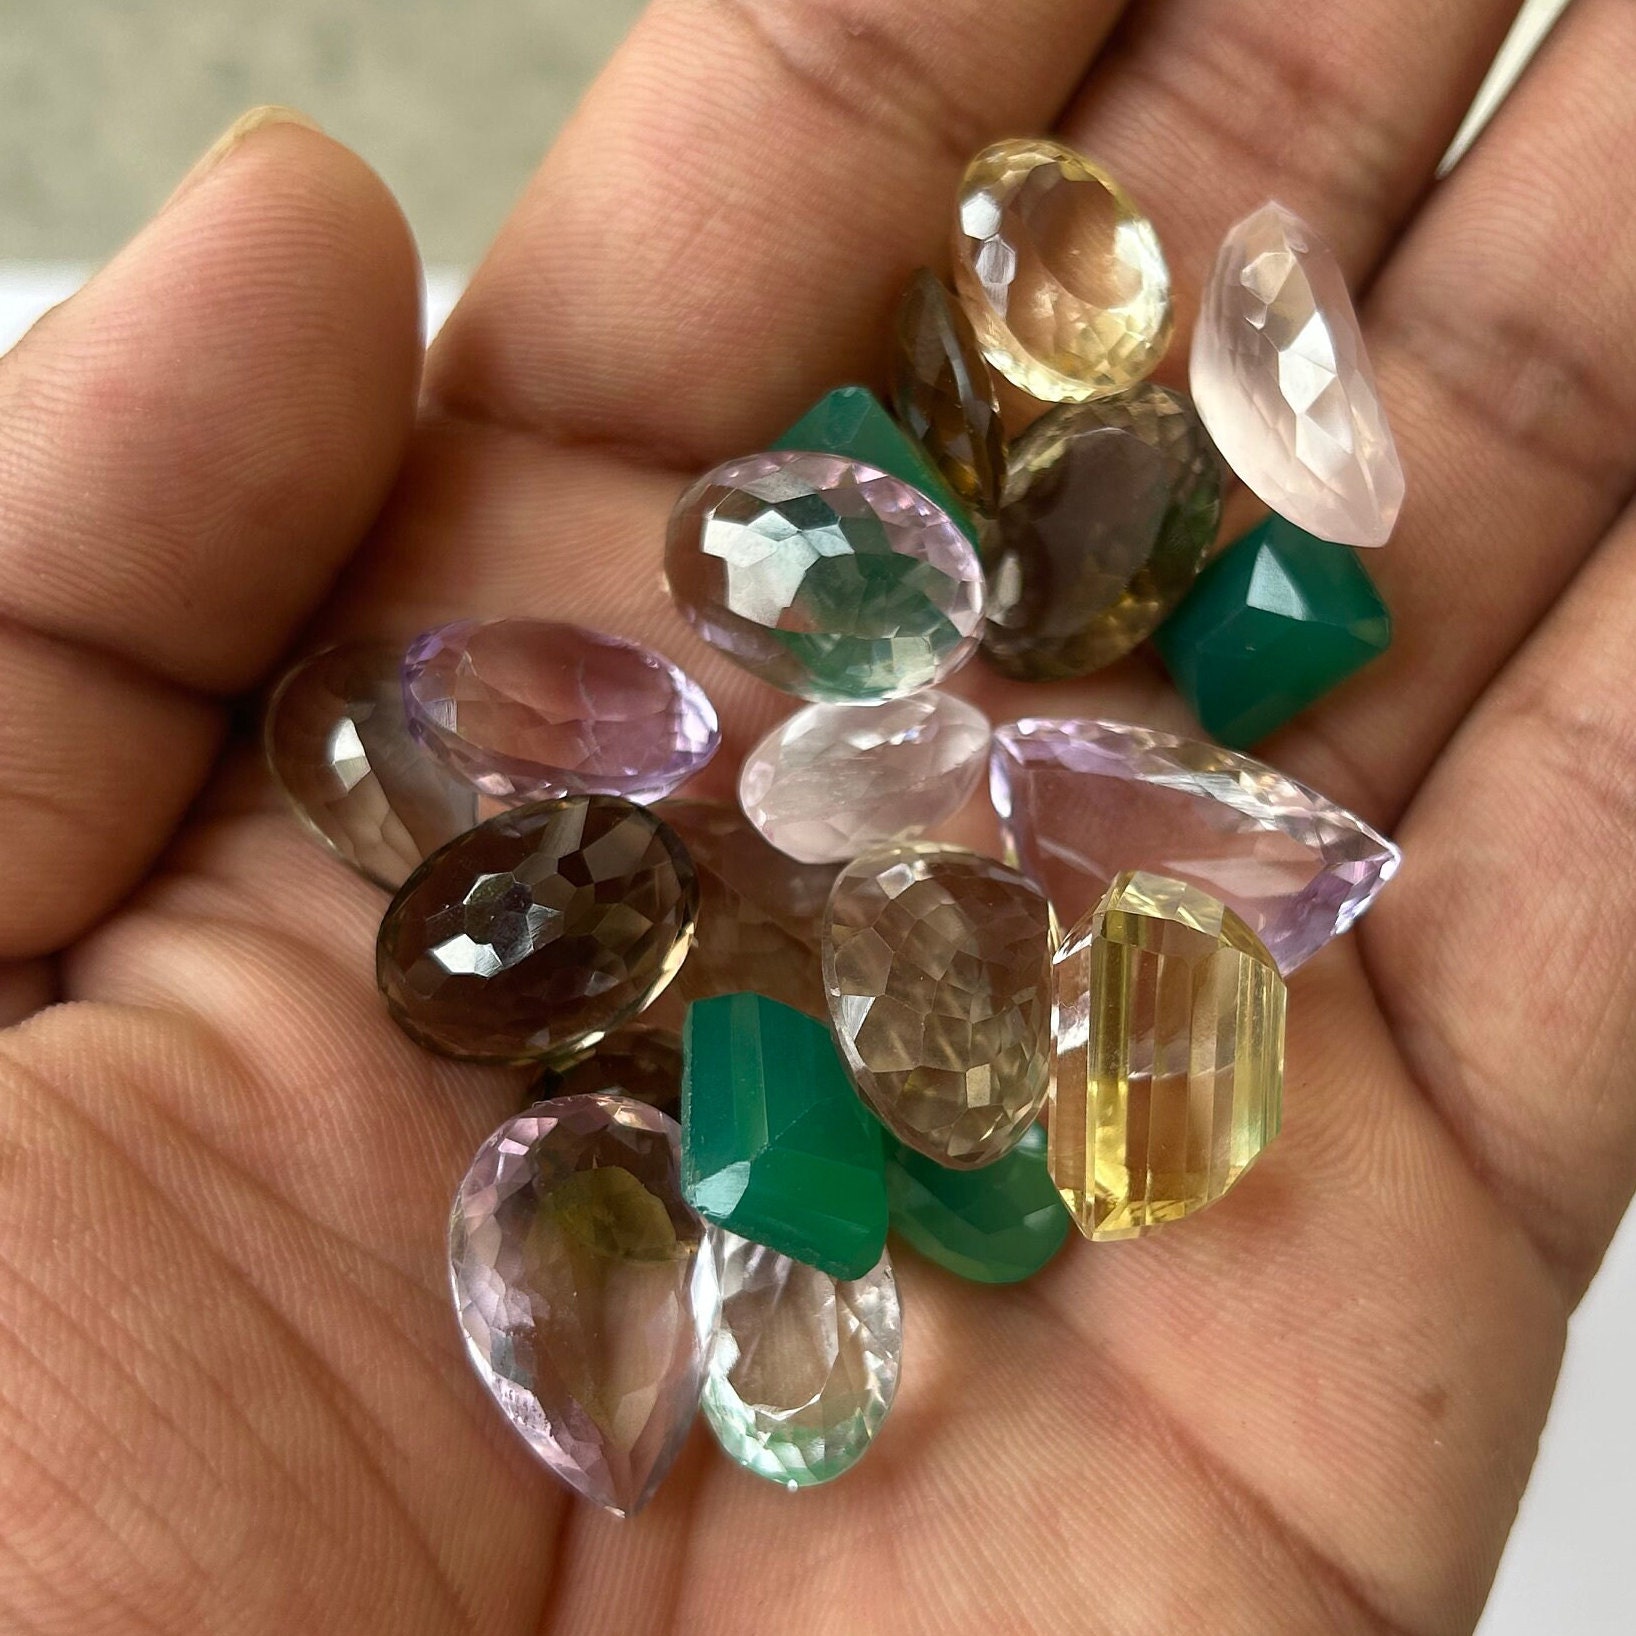 3 Unexpected Things You Can Do With Loose Gemstones, by GemsBiz